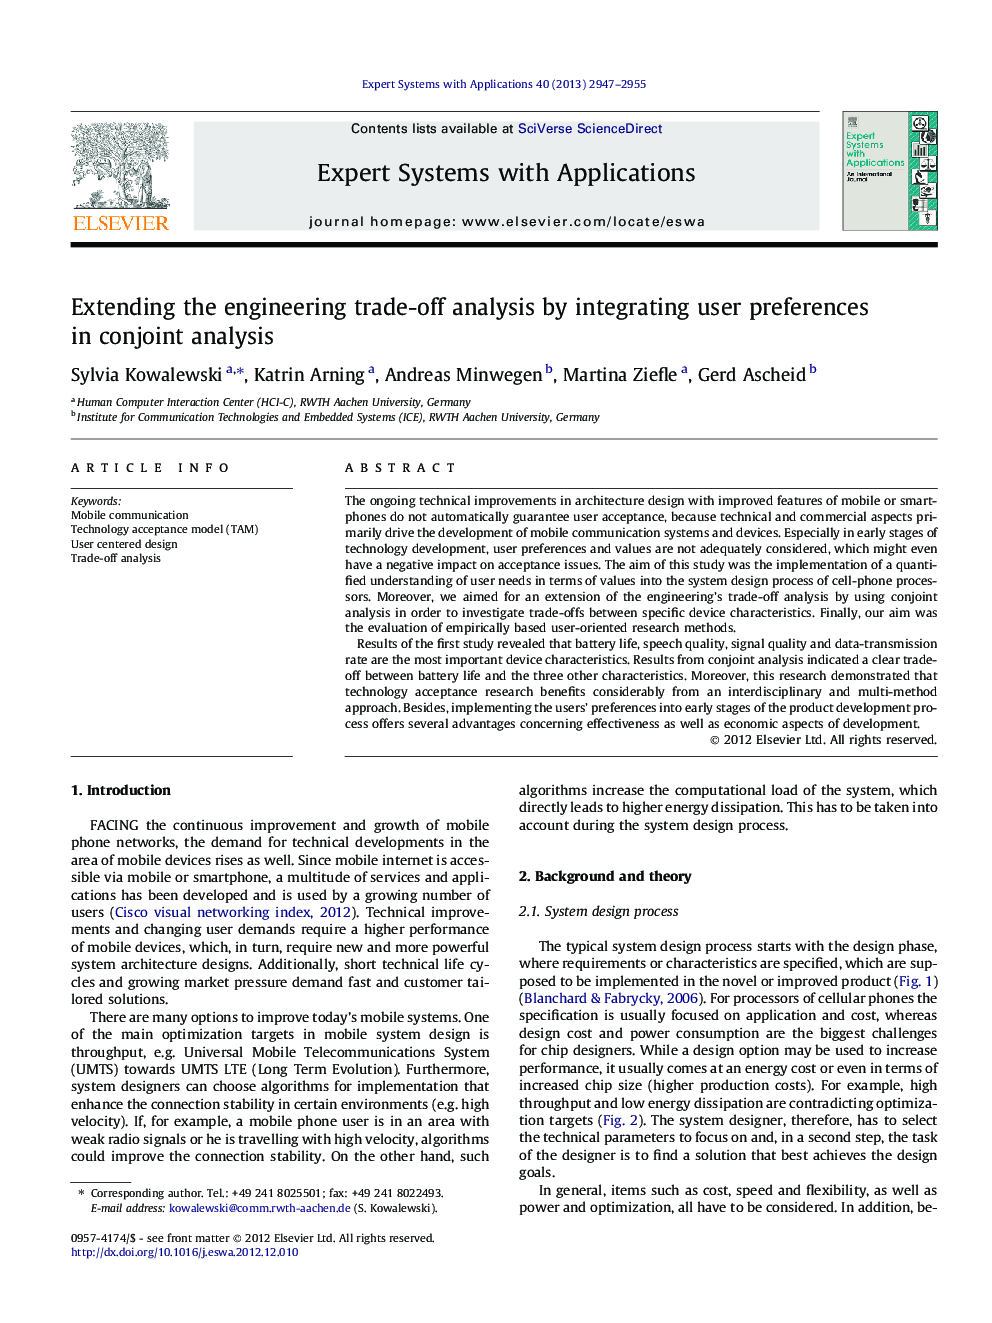 Extending the engineering trade-off analysis by integrating user preferences in conjoint analysis